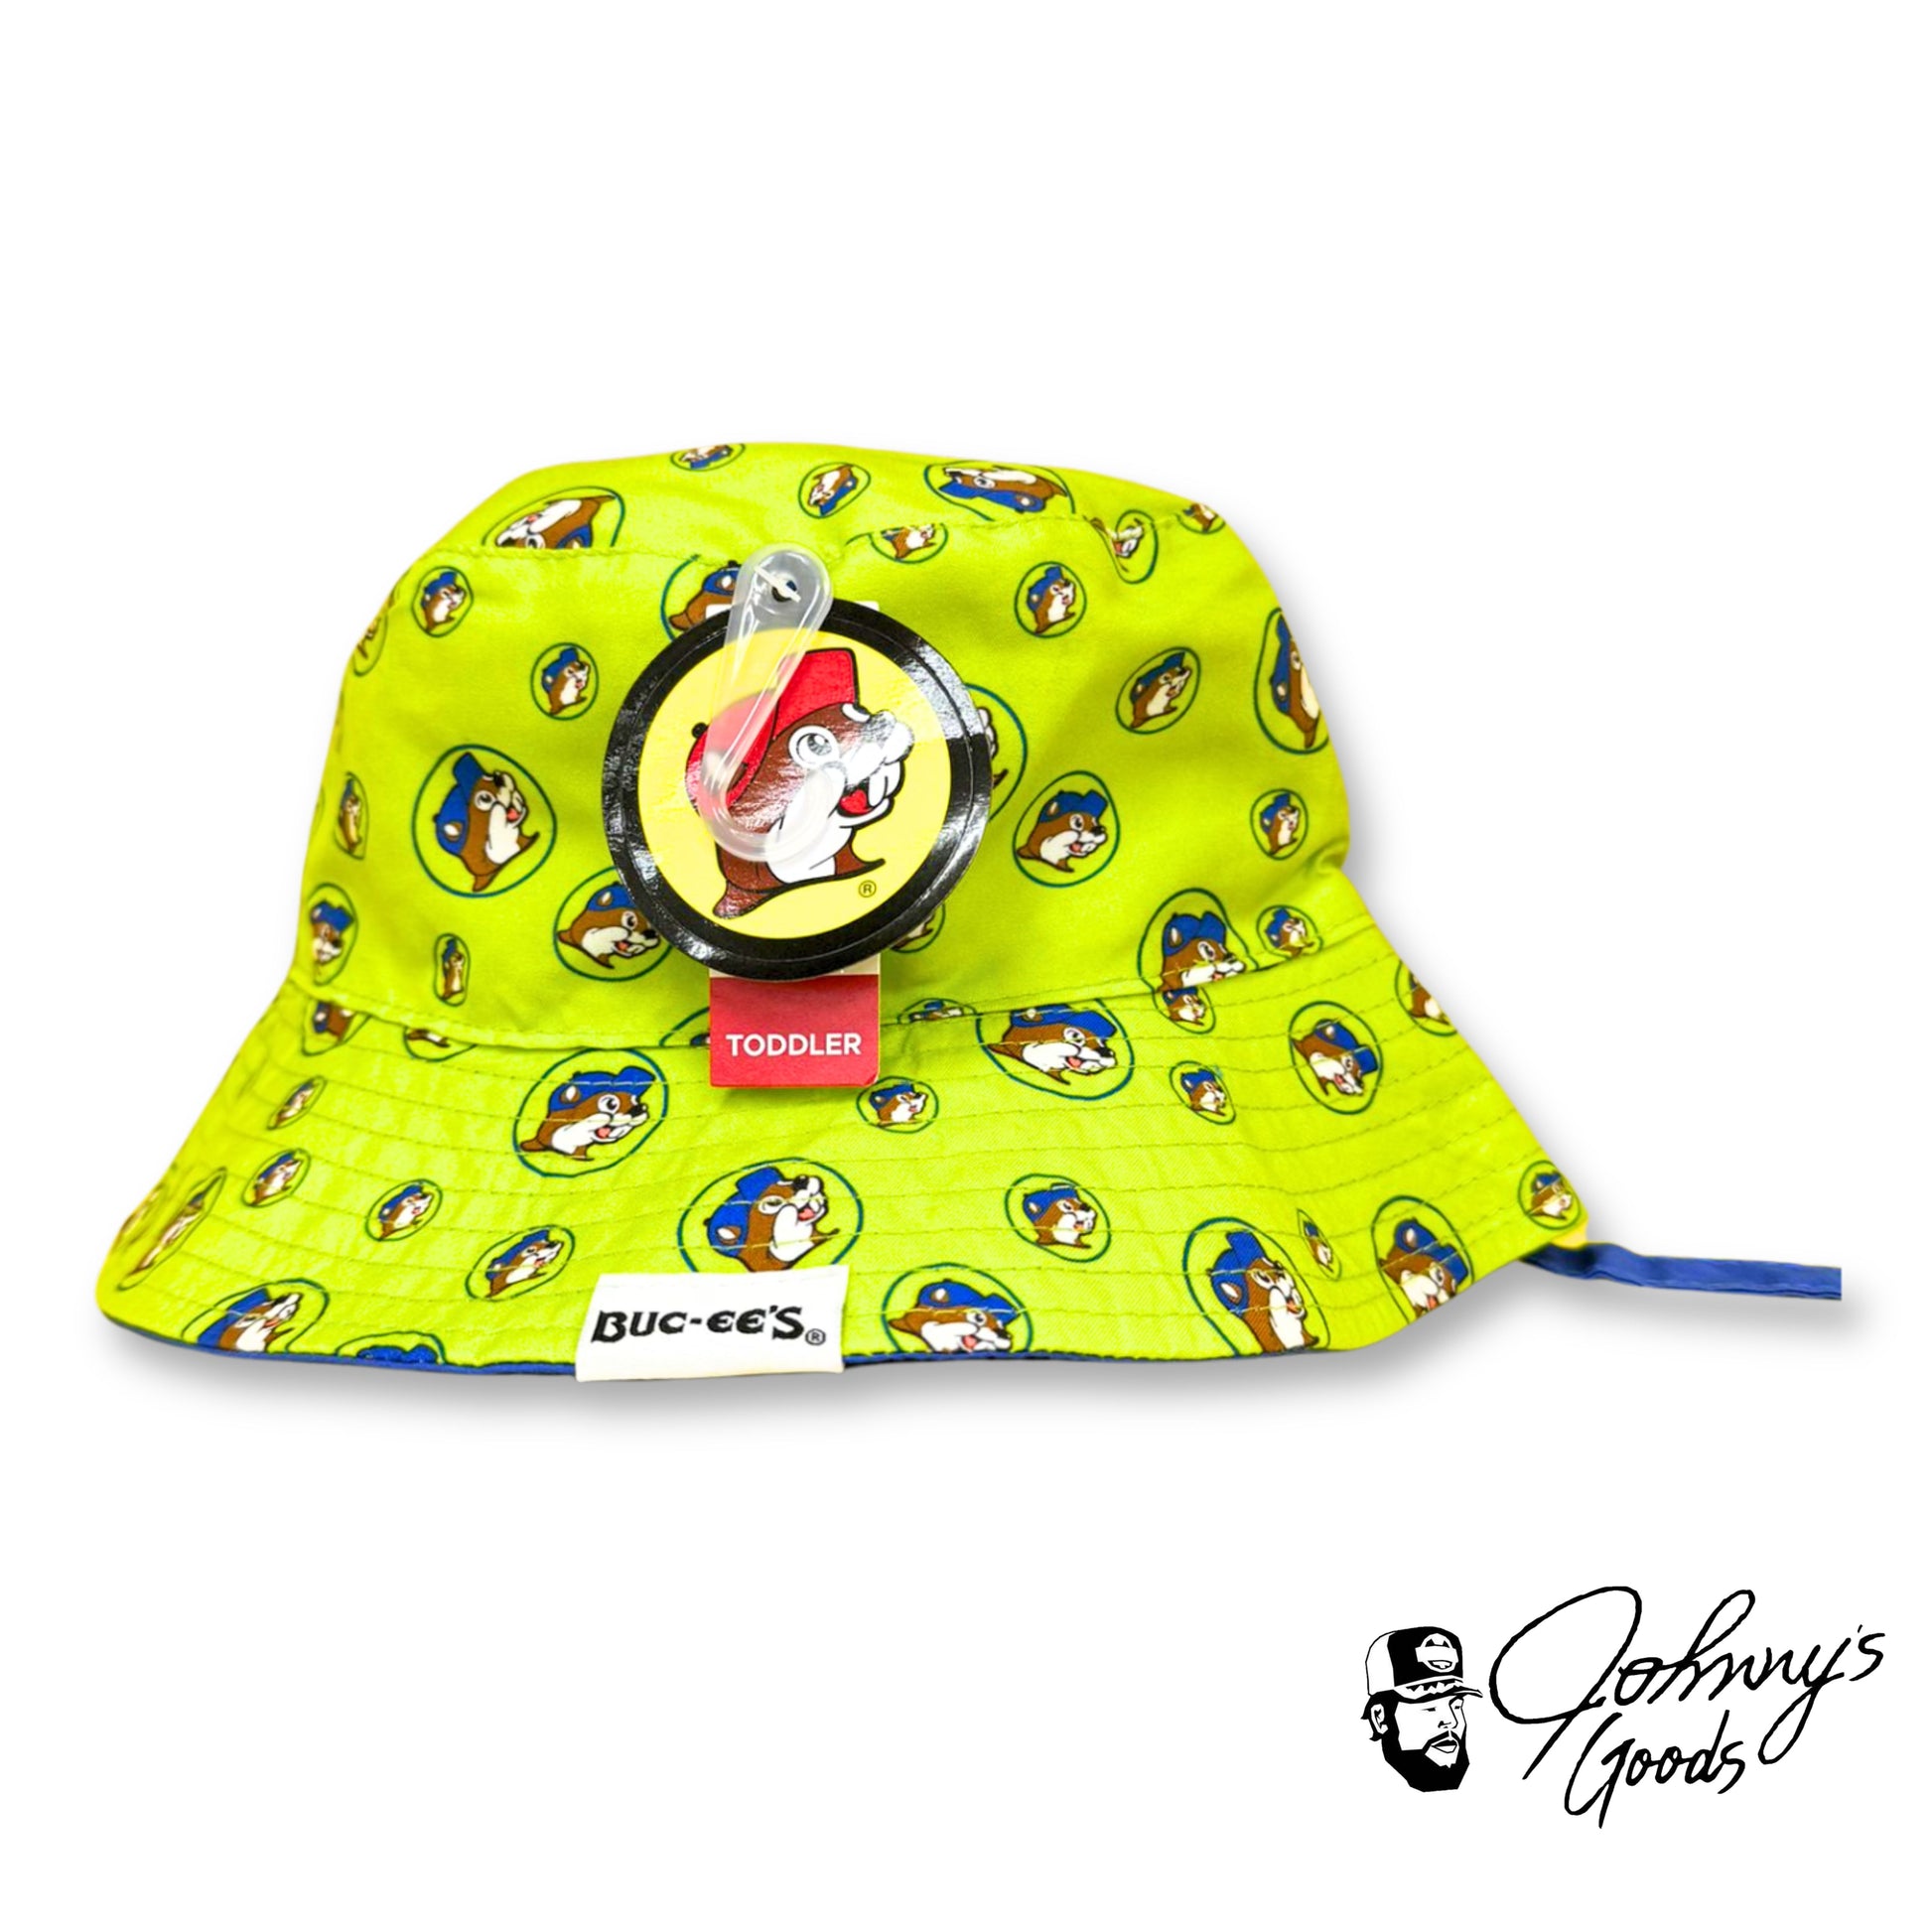 Buc-ee's Reversible Hat Blue and Green buc ees buc ee's bucees buccees buc-ees